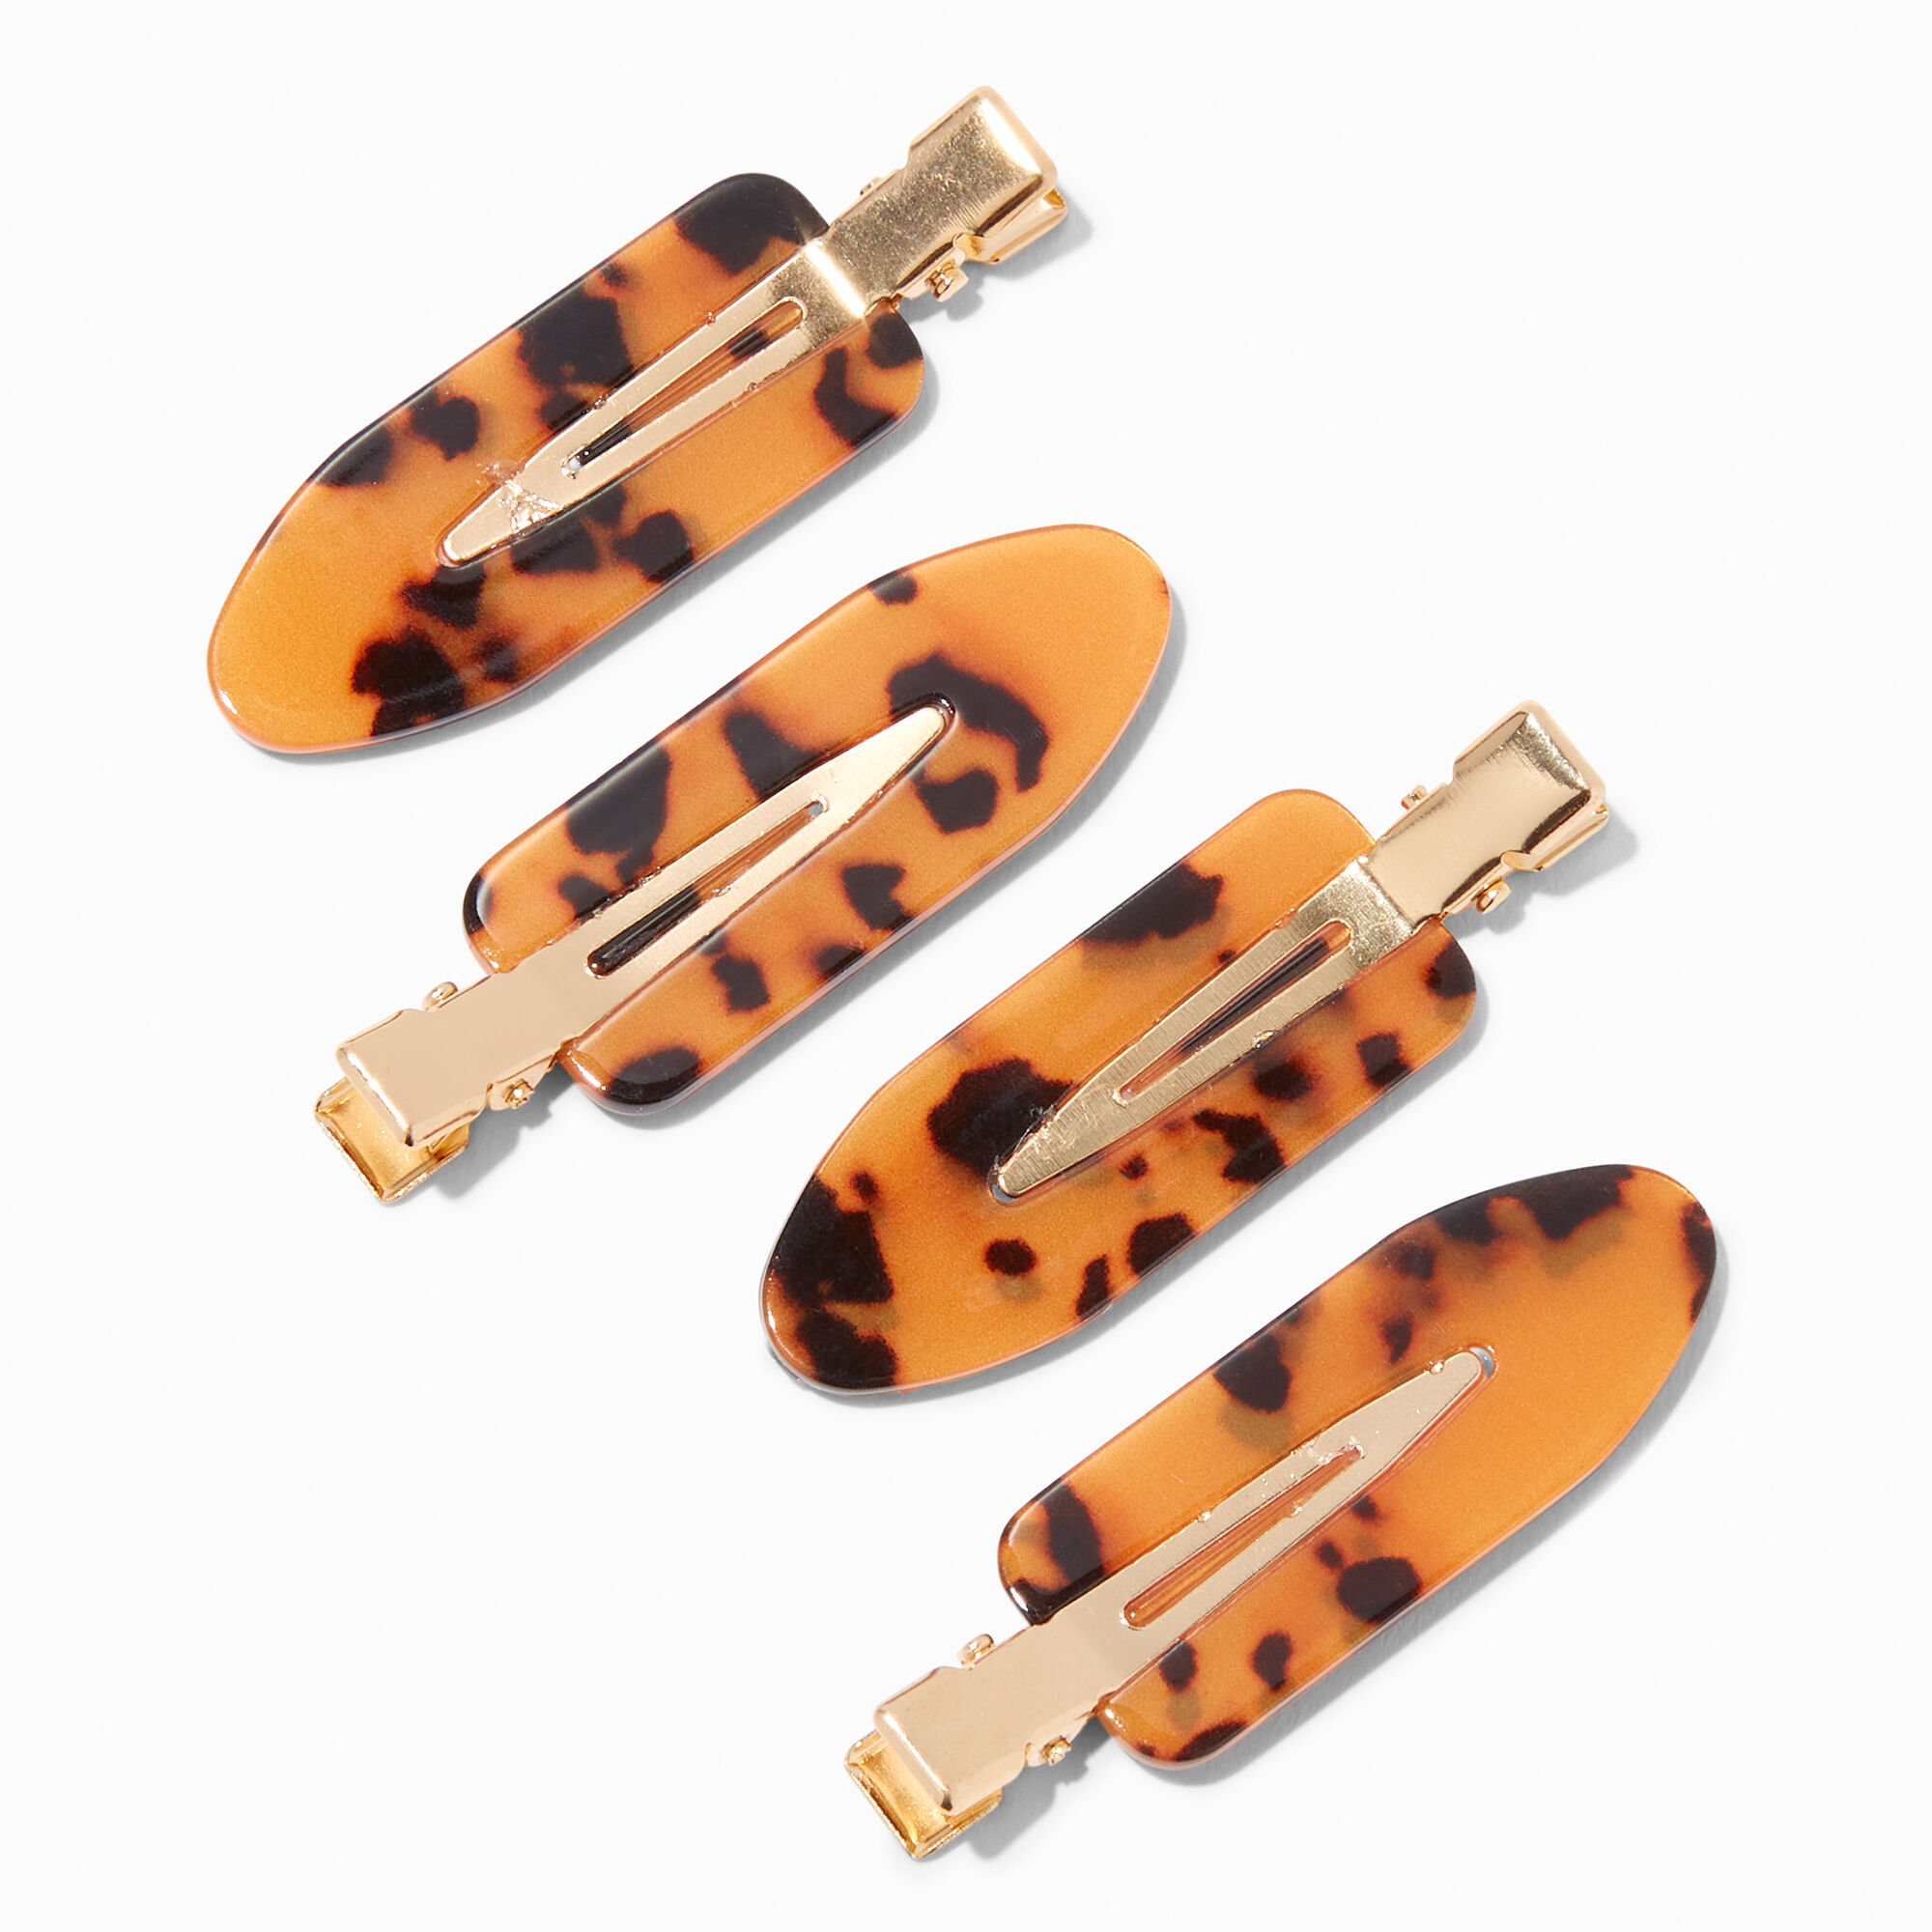 View Claires Tortoiseshell No Crease Hair Styling Clips 4 Pack Brown information